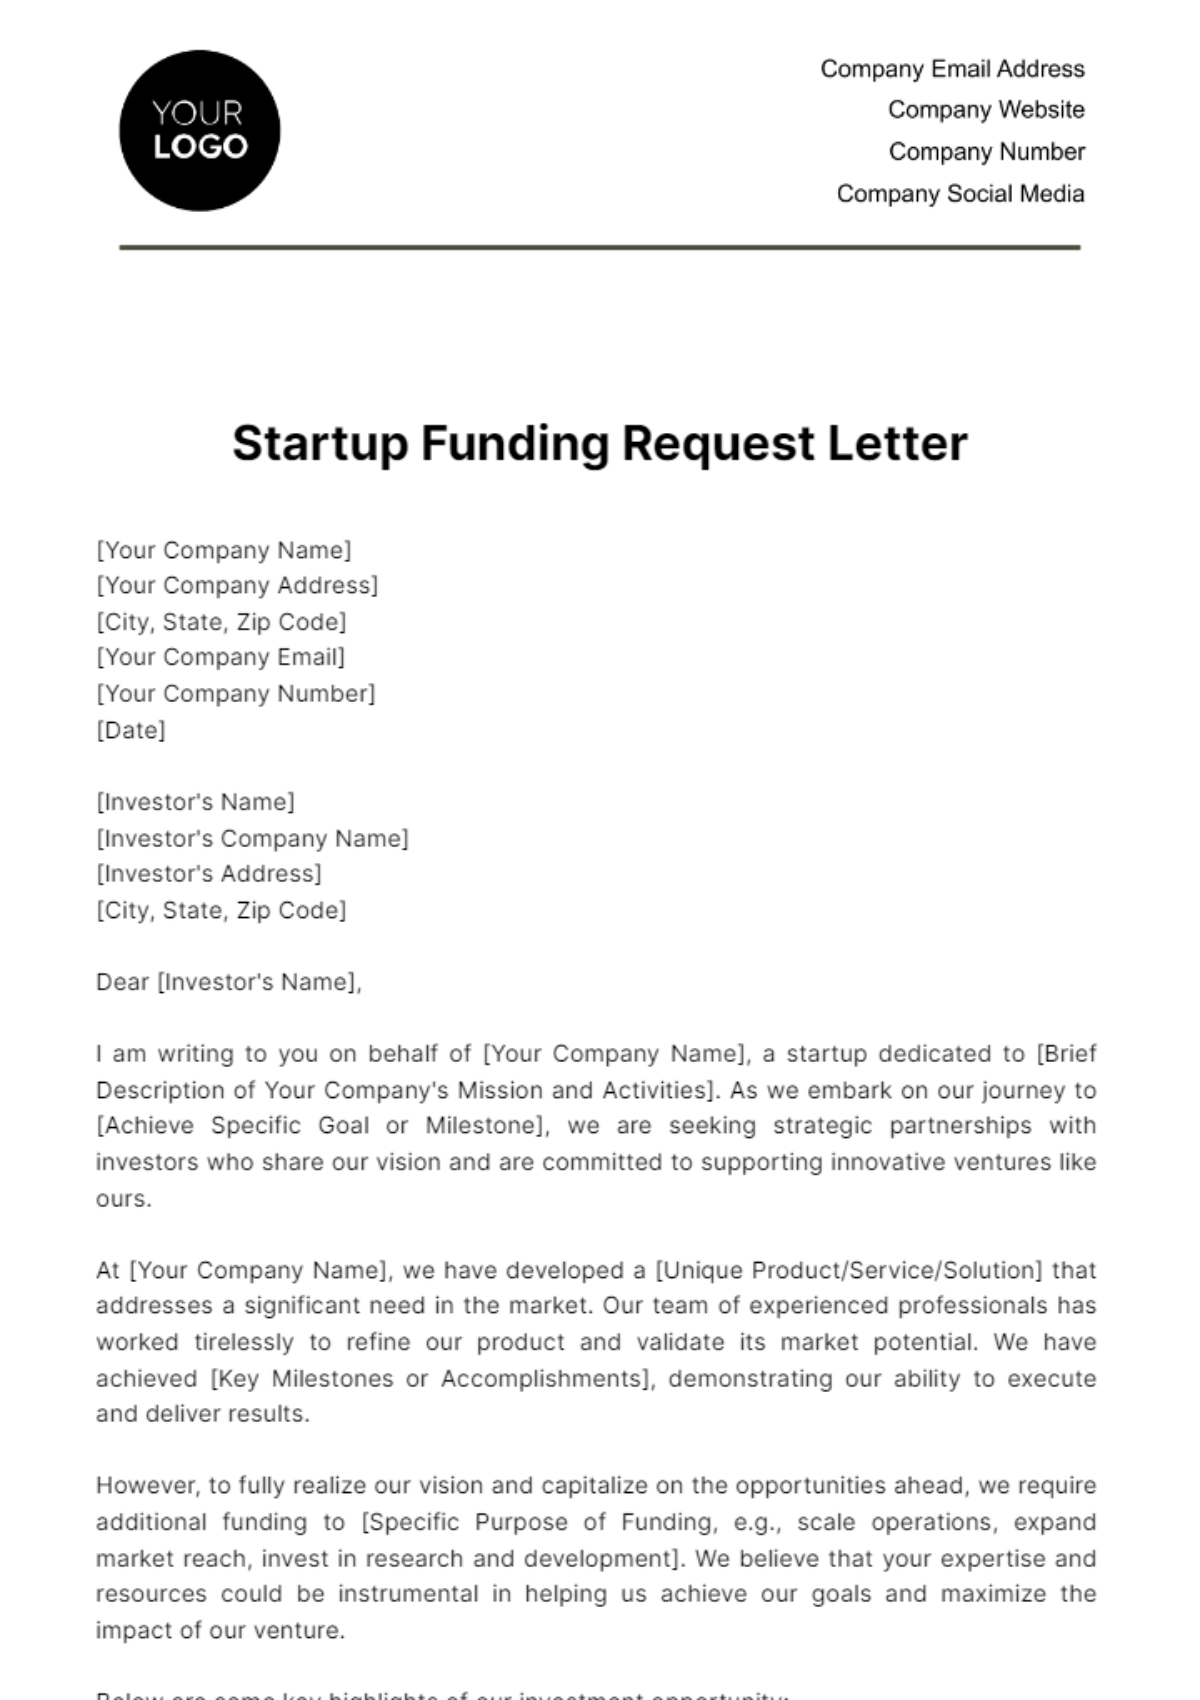 Startup Funding Request Letter Template